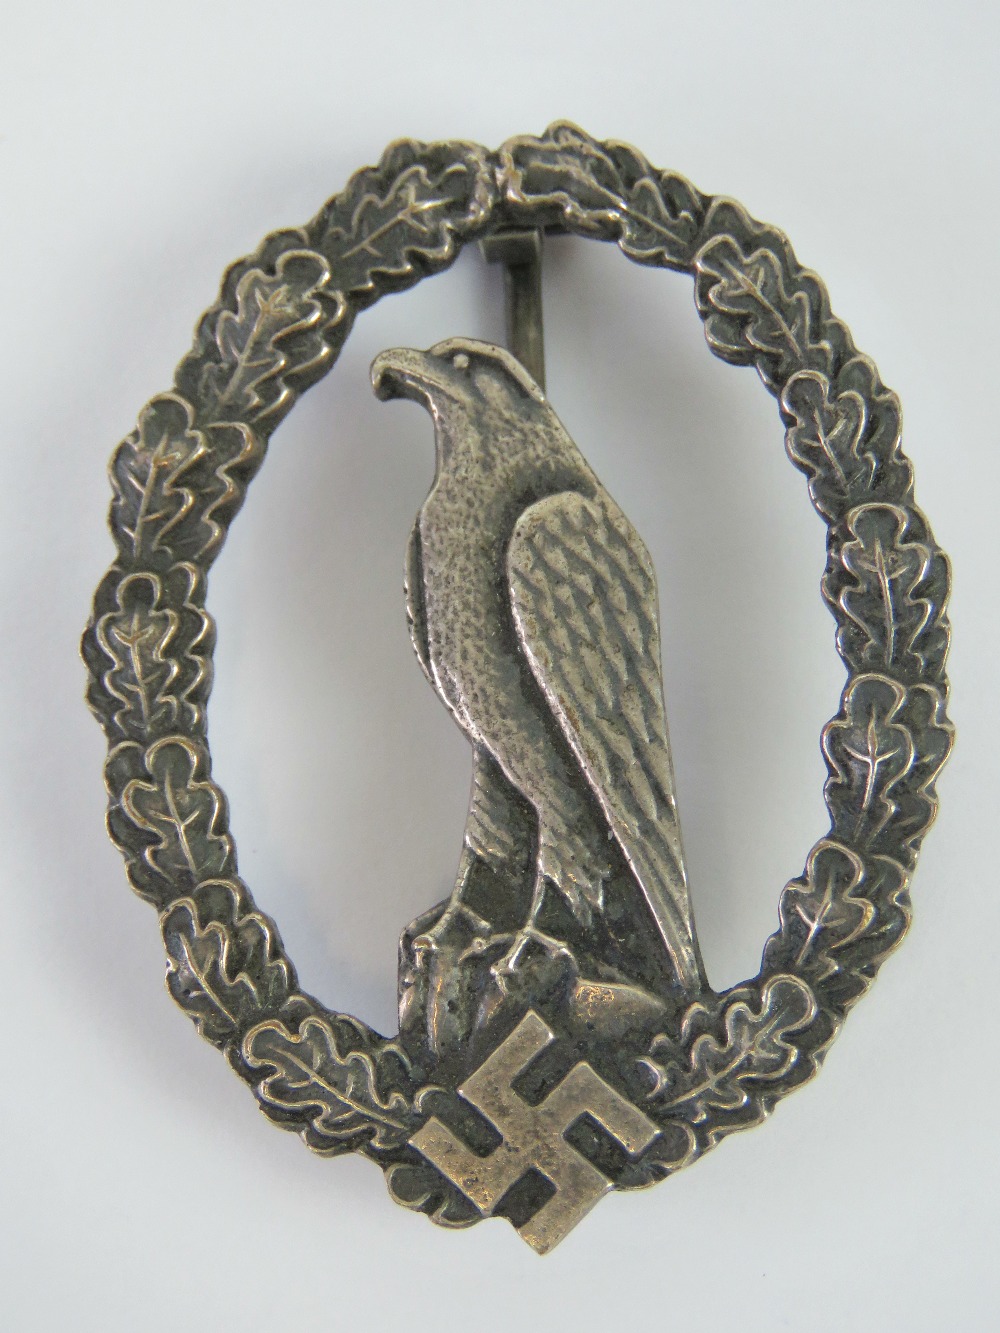 A reproduction WWII German Luftwaffe Retired Pilot badge.